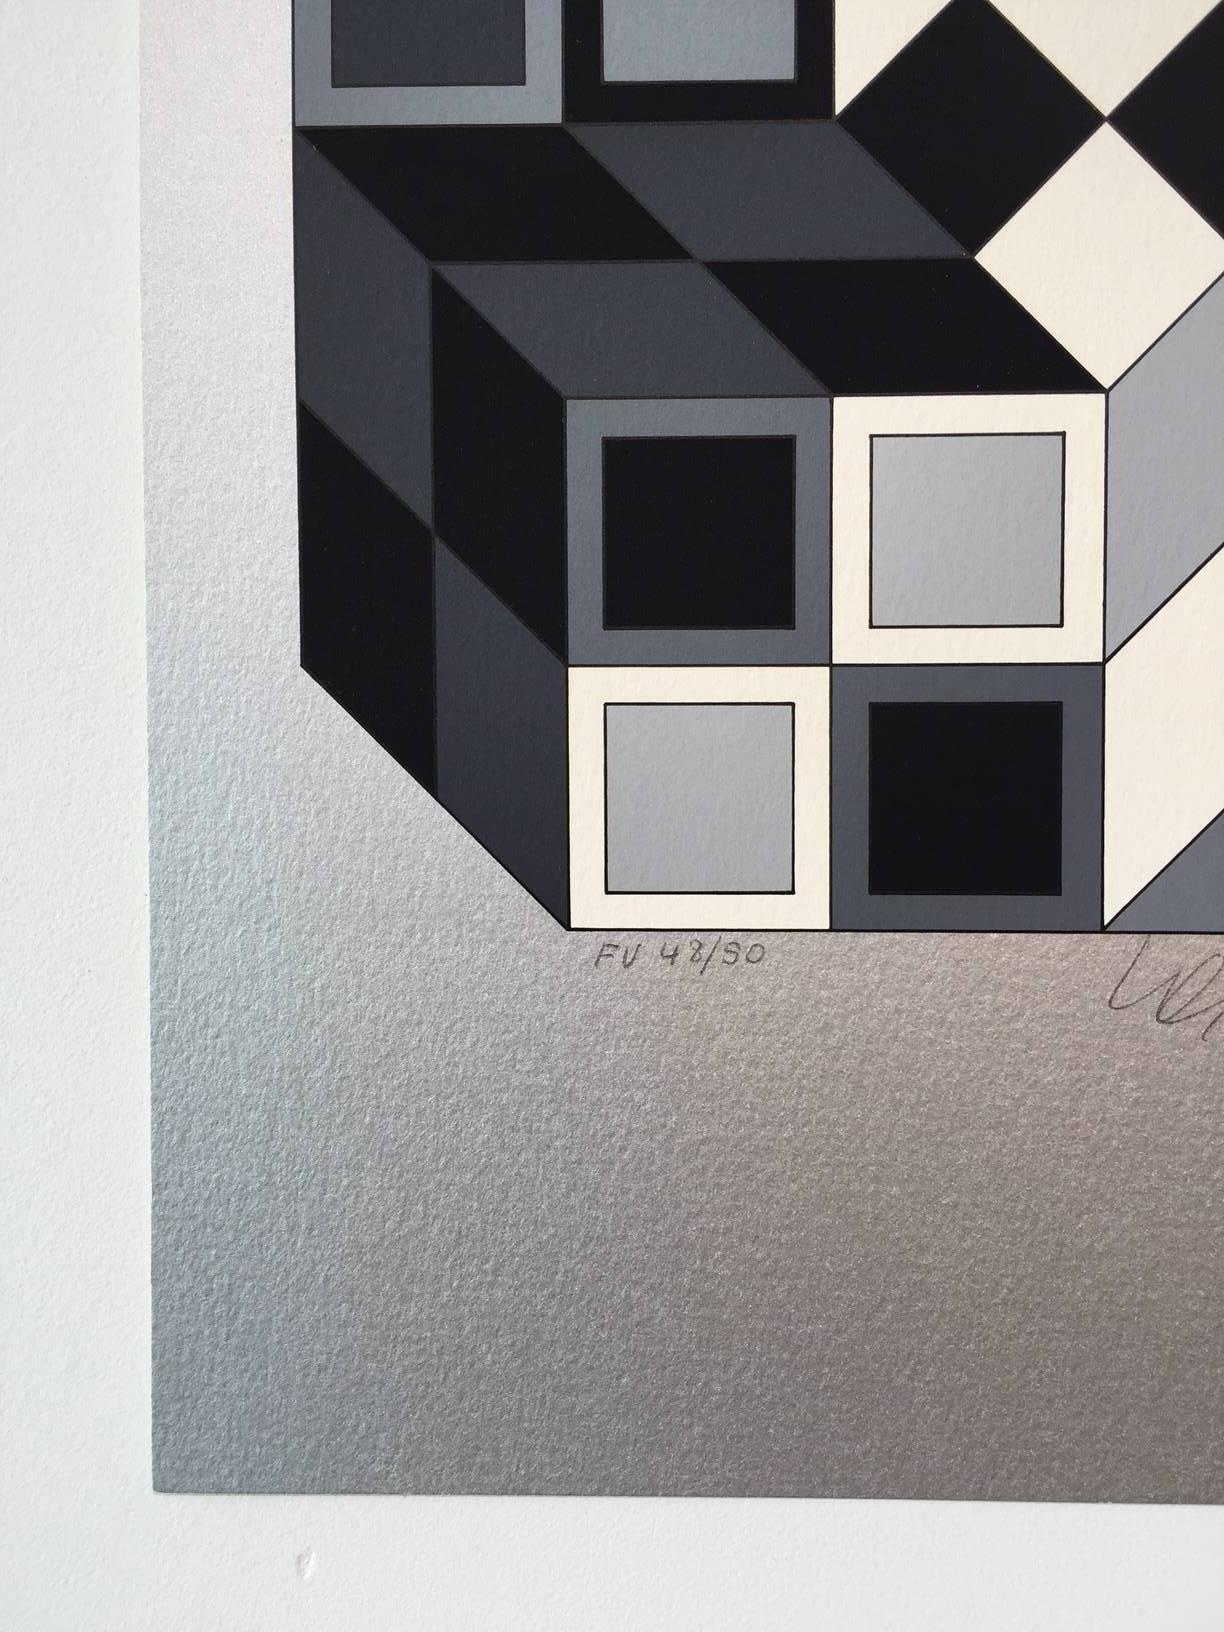 TECHNICAL INFORMATION:

Victor Vasarely
Composition Silver
1980
Screenprint
13 x 10 in.
Edition of 50
Pencil signed and numbered


Accompanied with COA by Gregg Shienbaum Fine Art. 


Condition: This work is in excellent condition. It has never been